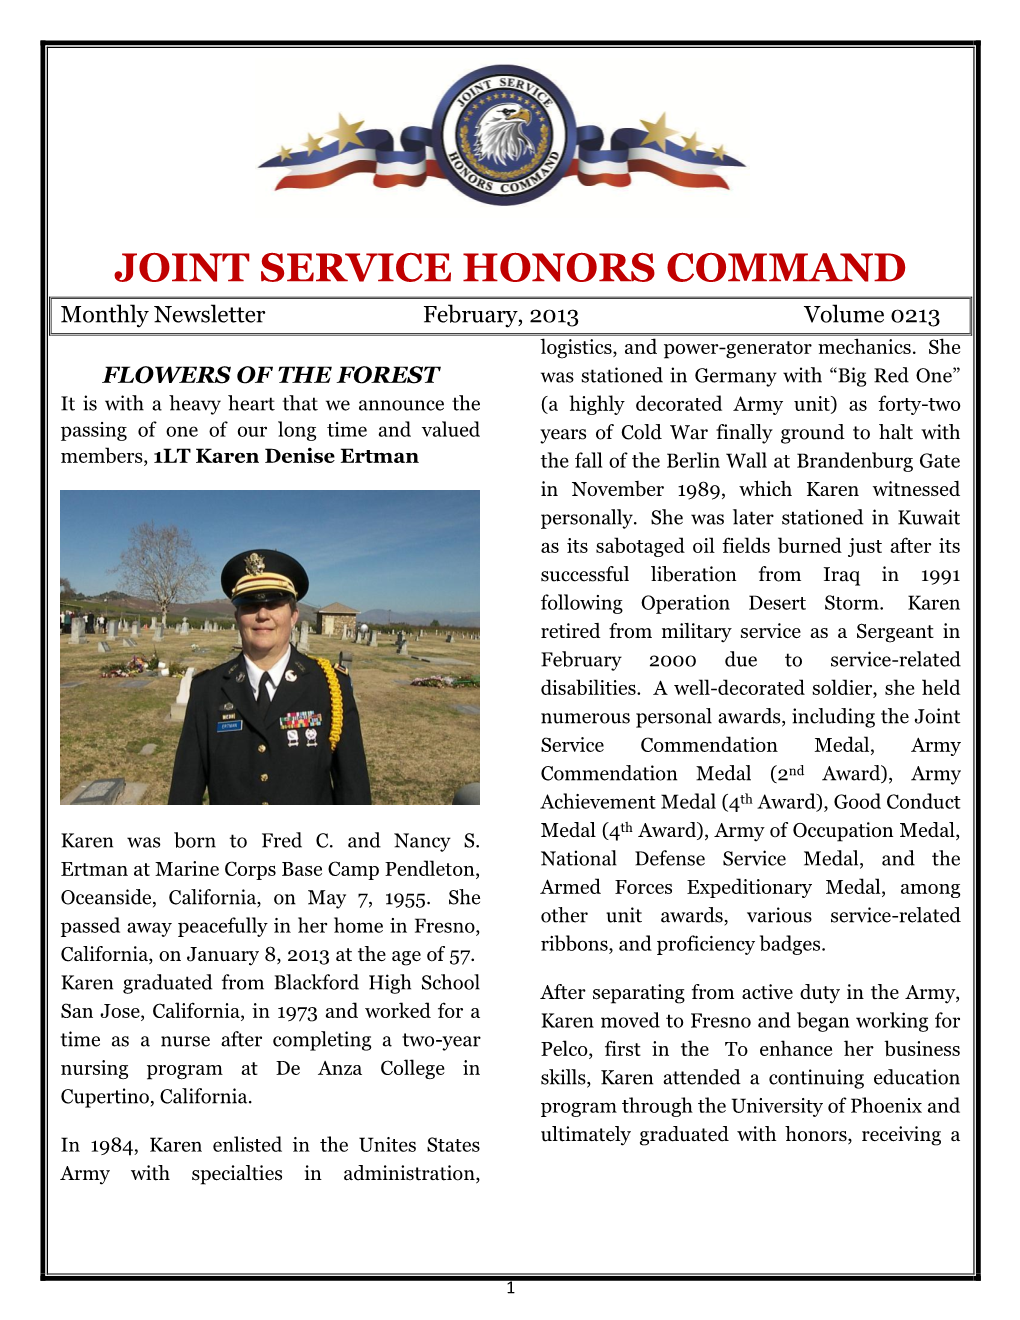 JOINT SERVICE HONORS COMMAND Monthly Newsletter February, 2013 Volume 0213 Logistics, and Power-Generator Mechanics